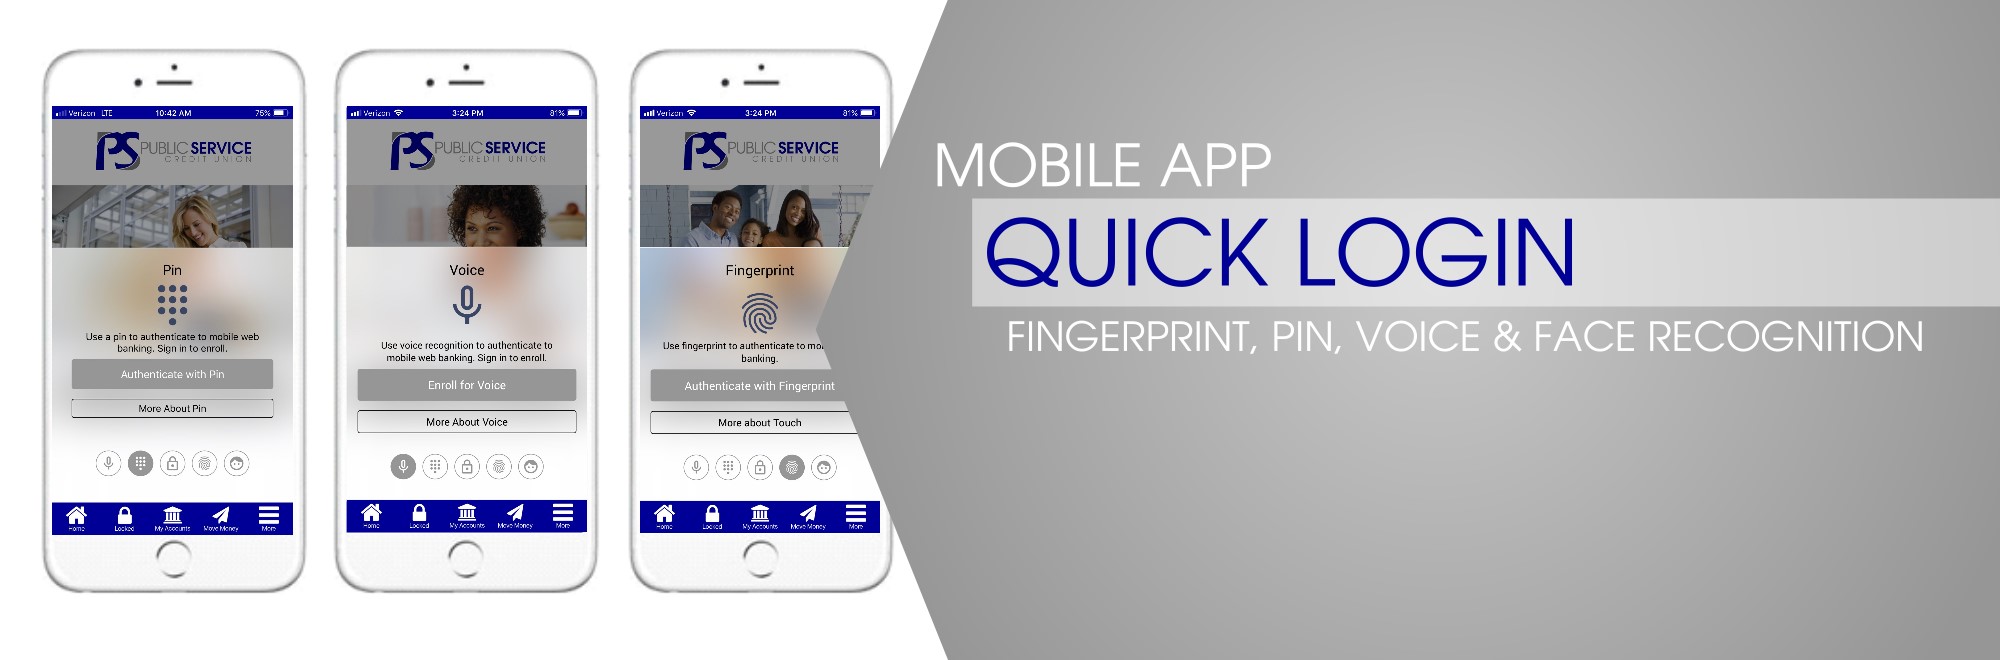 Quick login with pscu mobile app, fingerprint, pin, voice and face recognition- screenshot of app